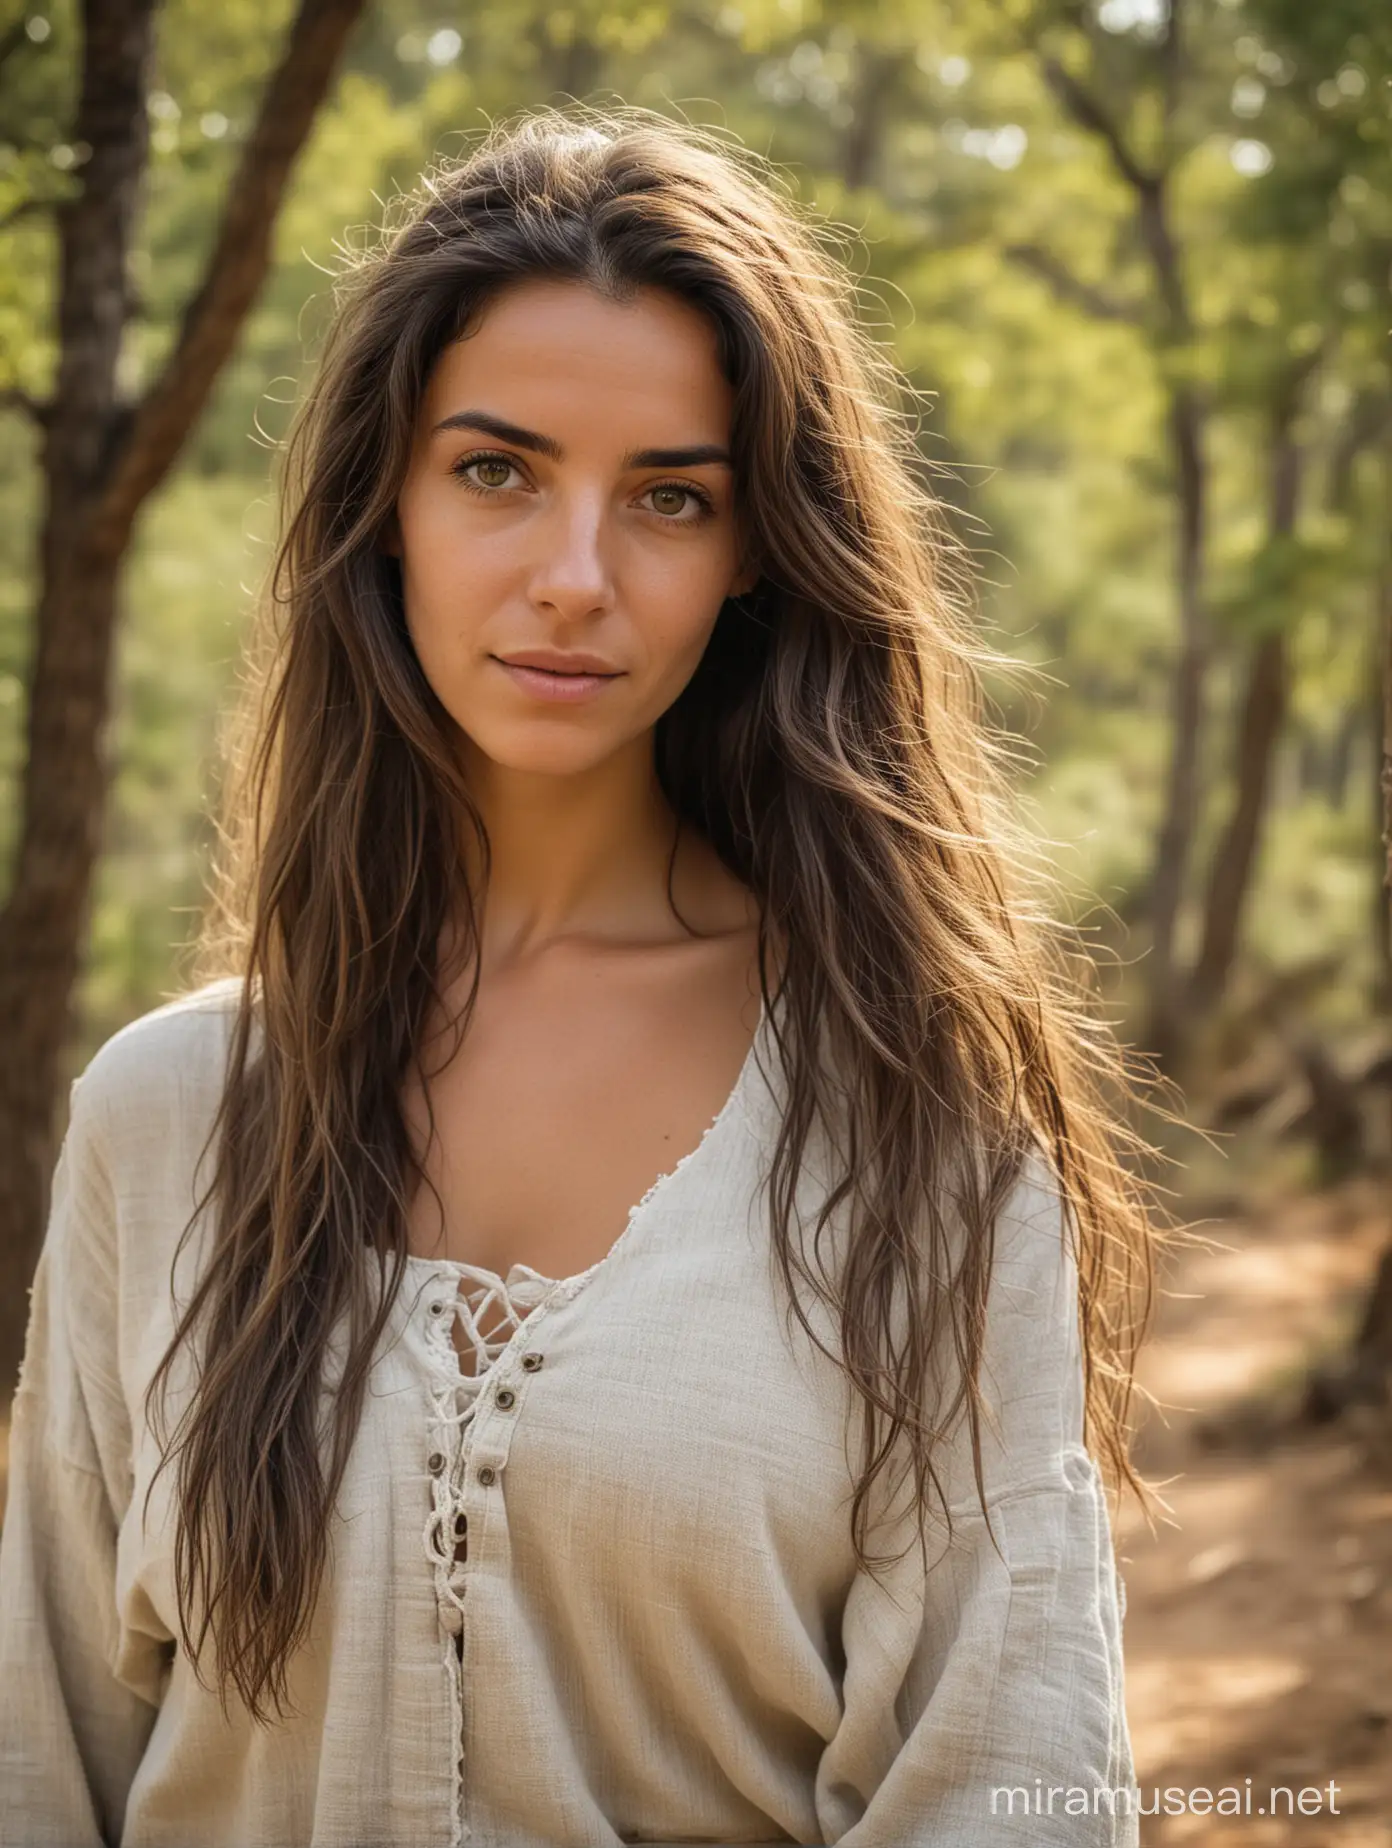 Sardinian Woman with Long Loose Hair in Rustic Linen Clothes